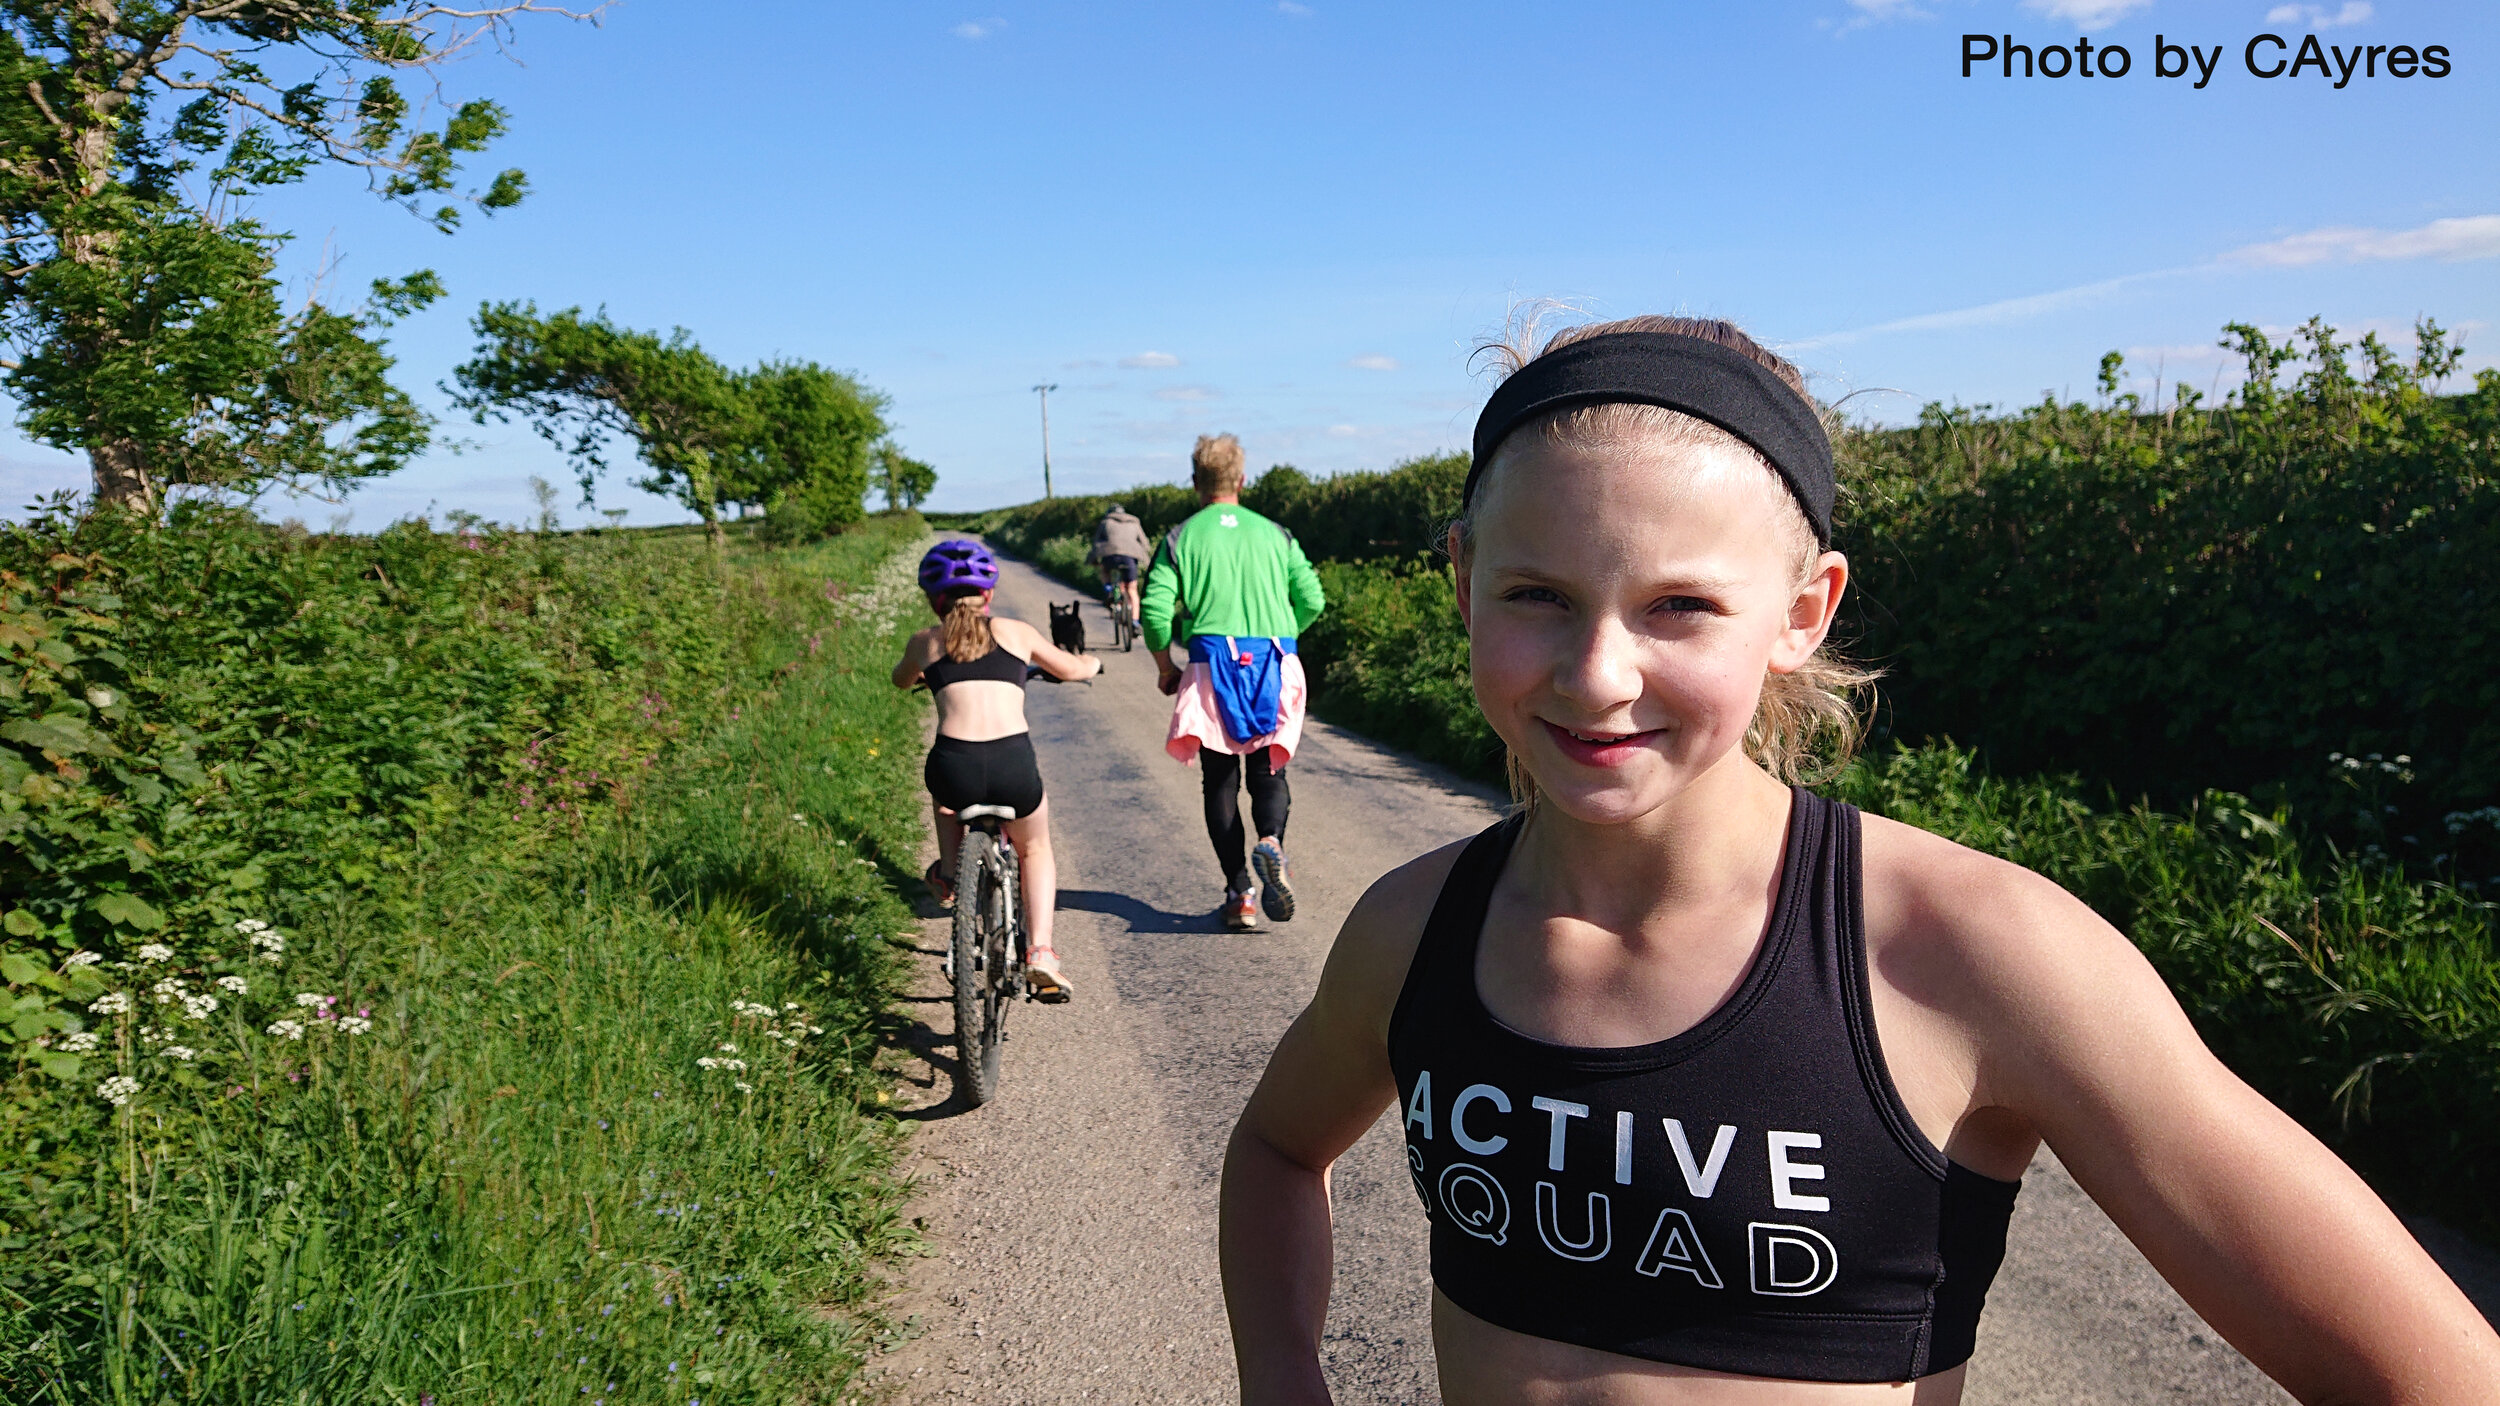 CAyres Elite gymnast fitness training out running cycling with family Tawstock 110520.JPG